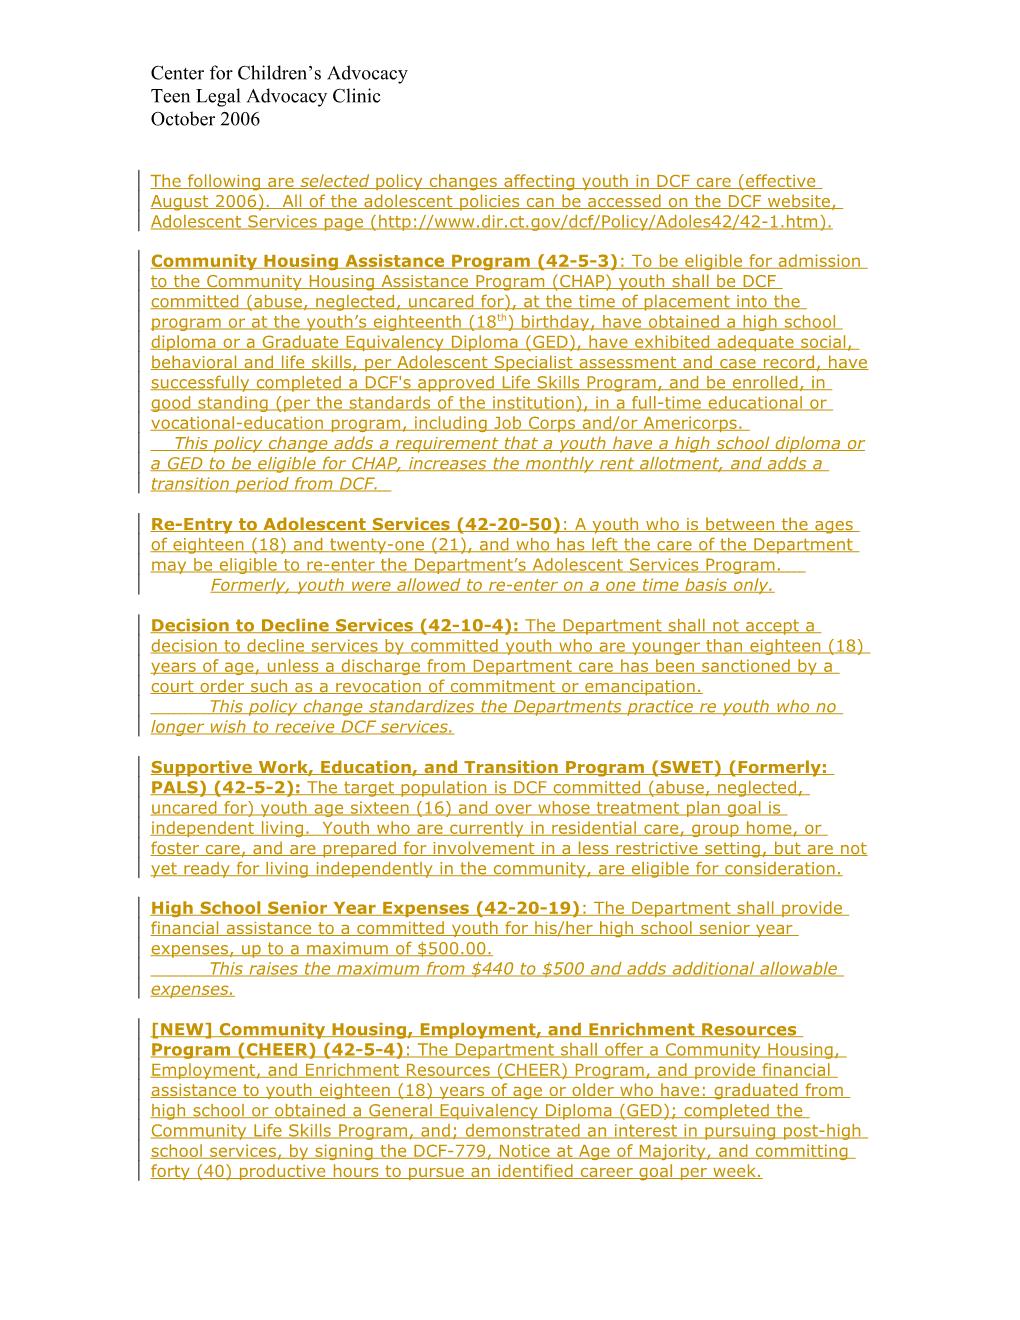 The Following Are Selected Policy Changes Affecting Youth in DCF Care (Effective August 2006)